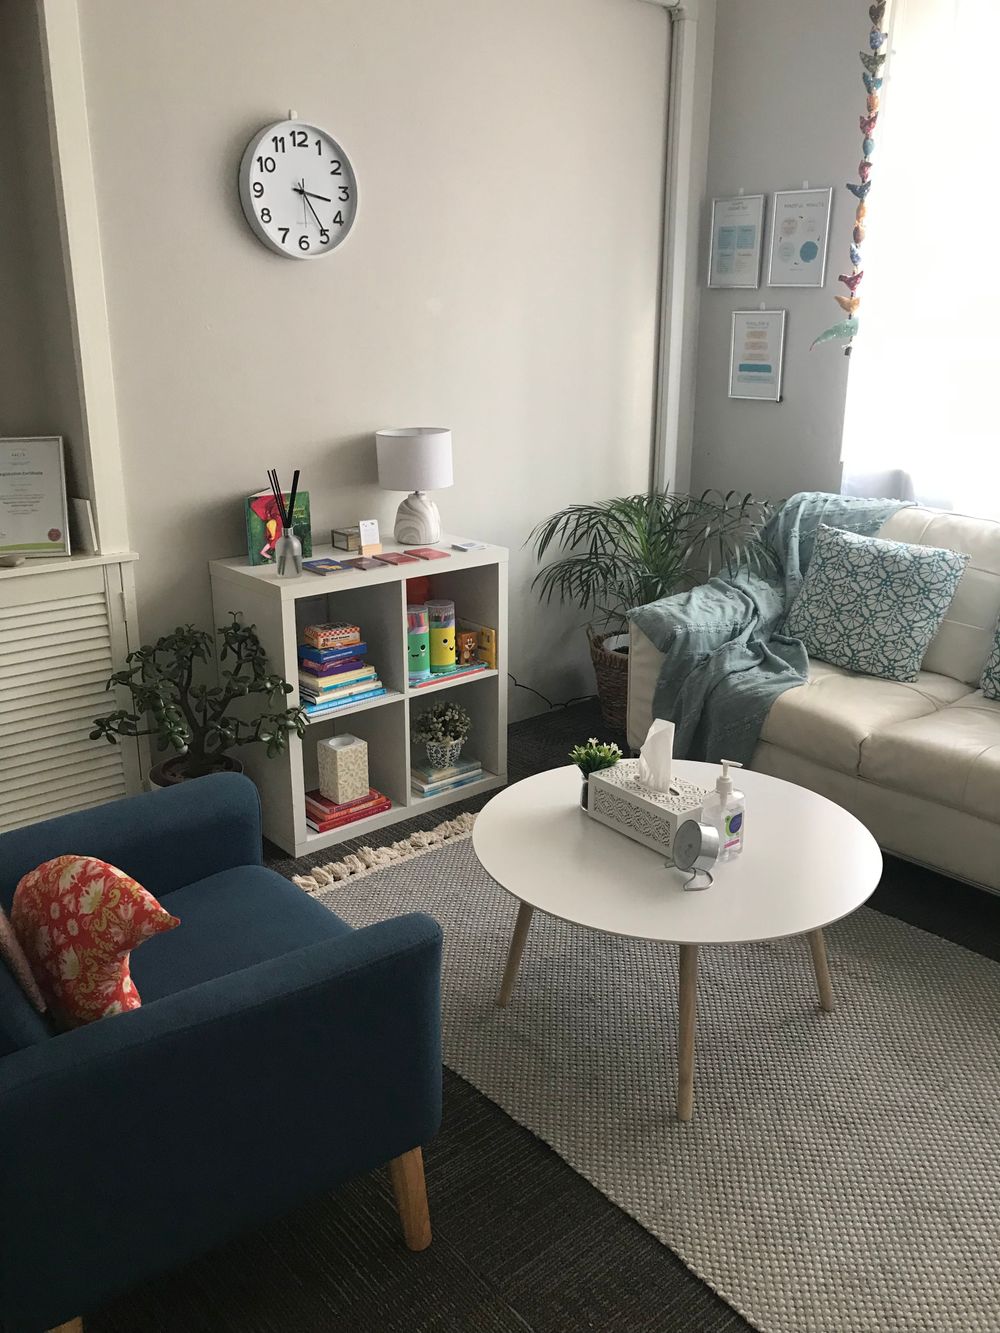 The therapeutic space
